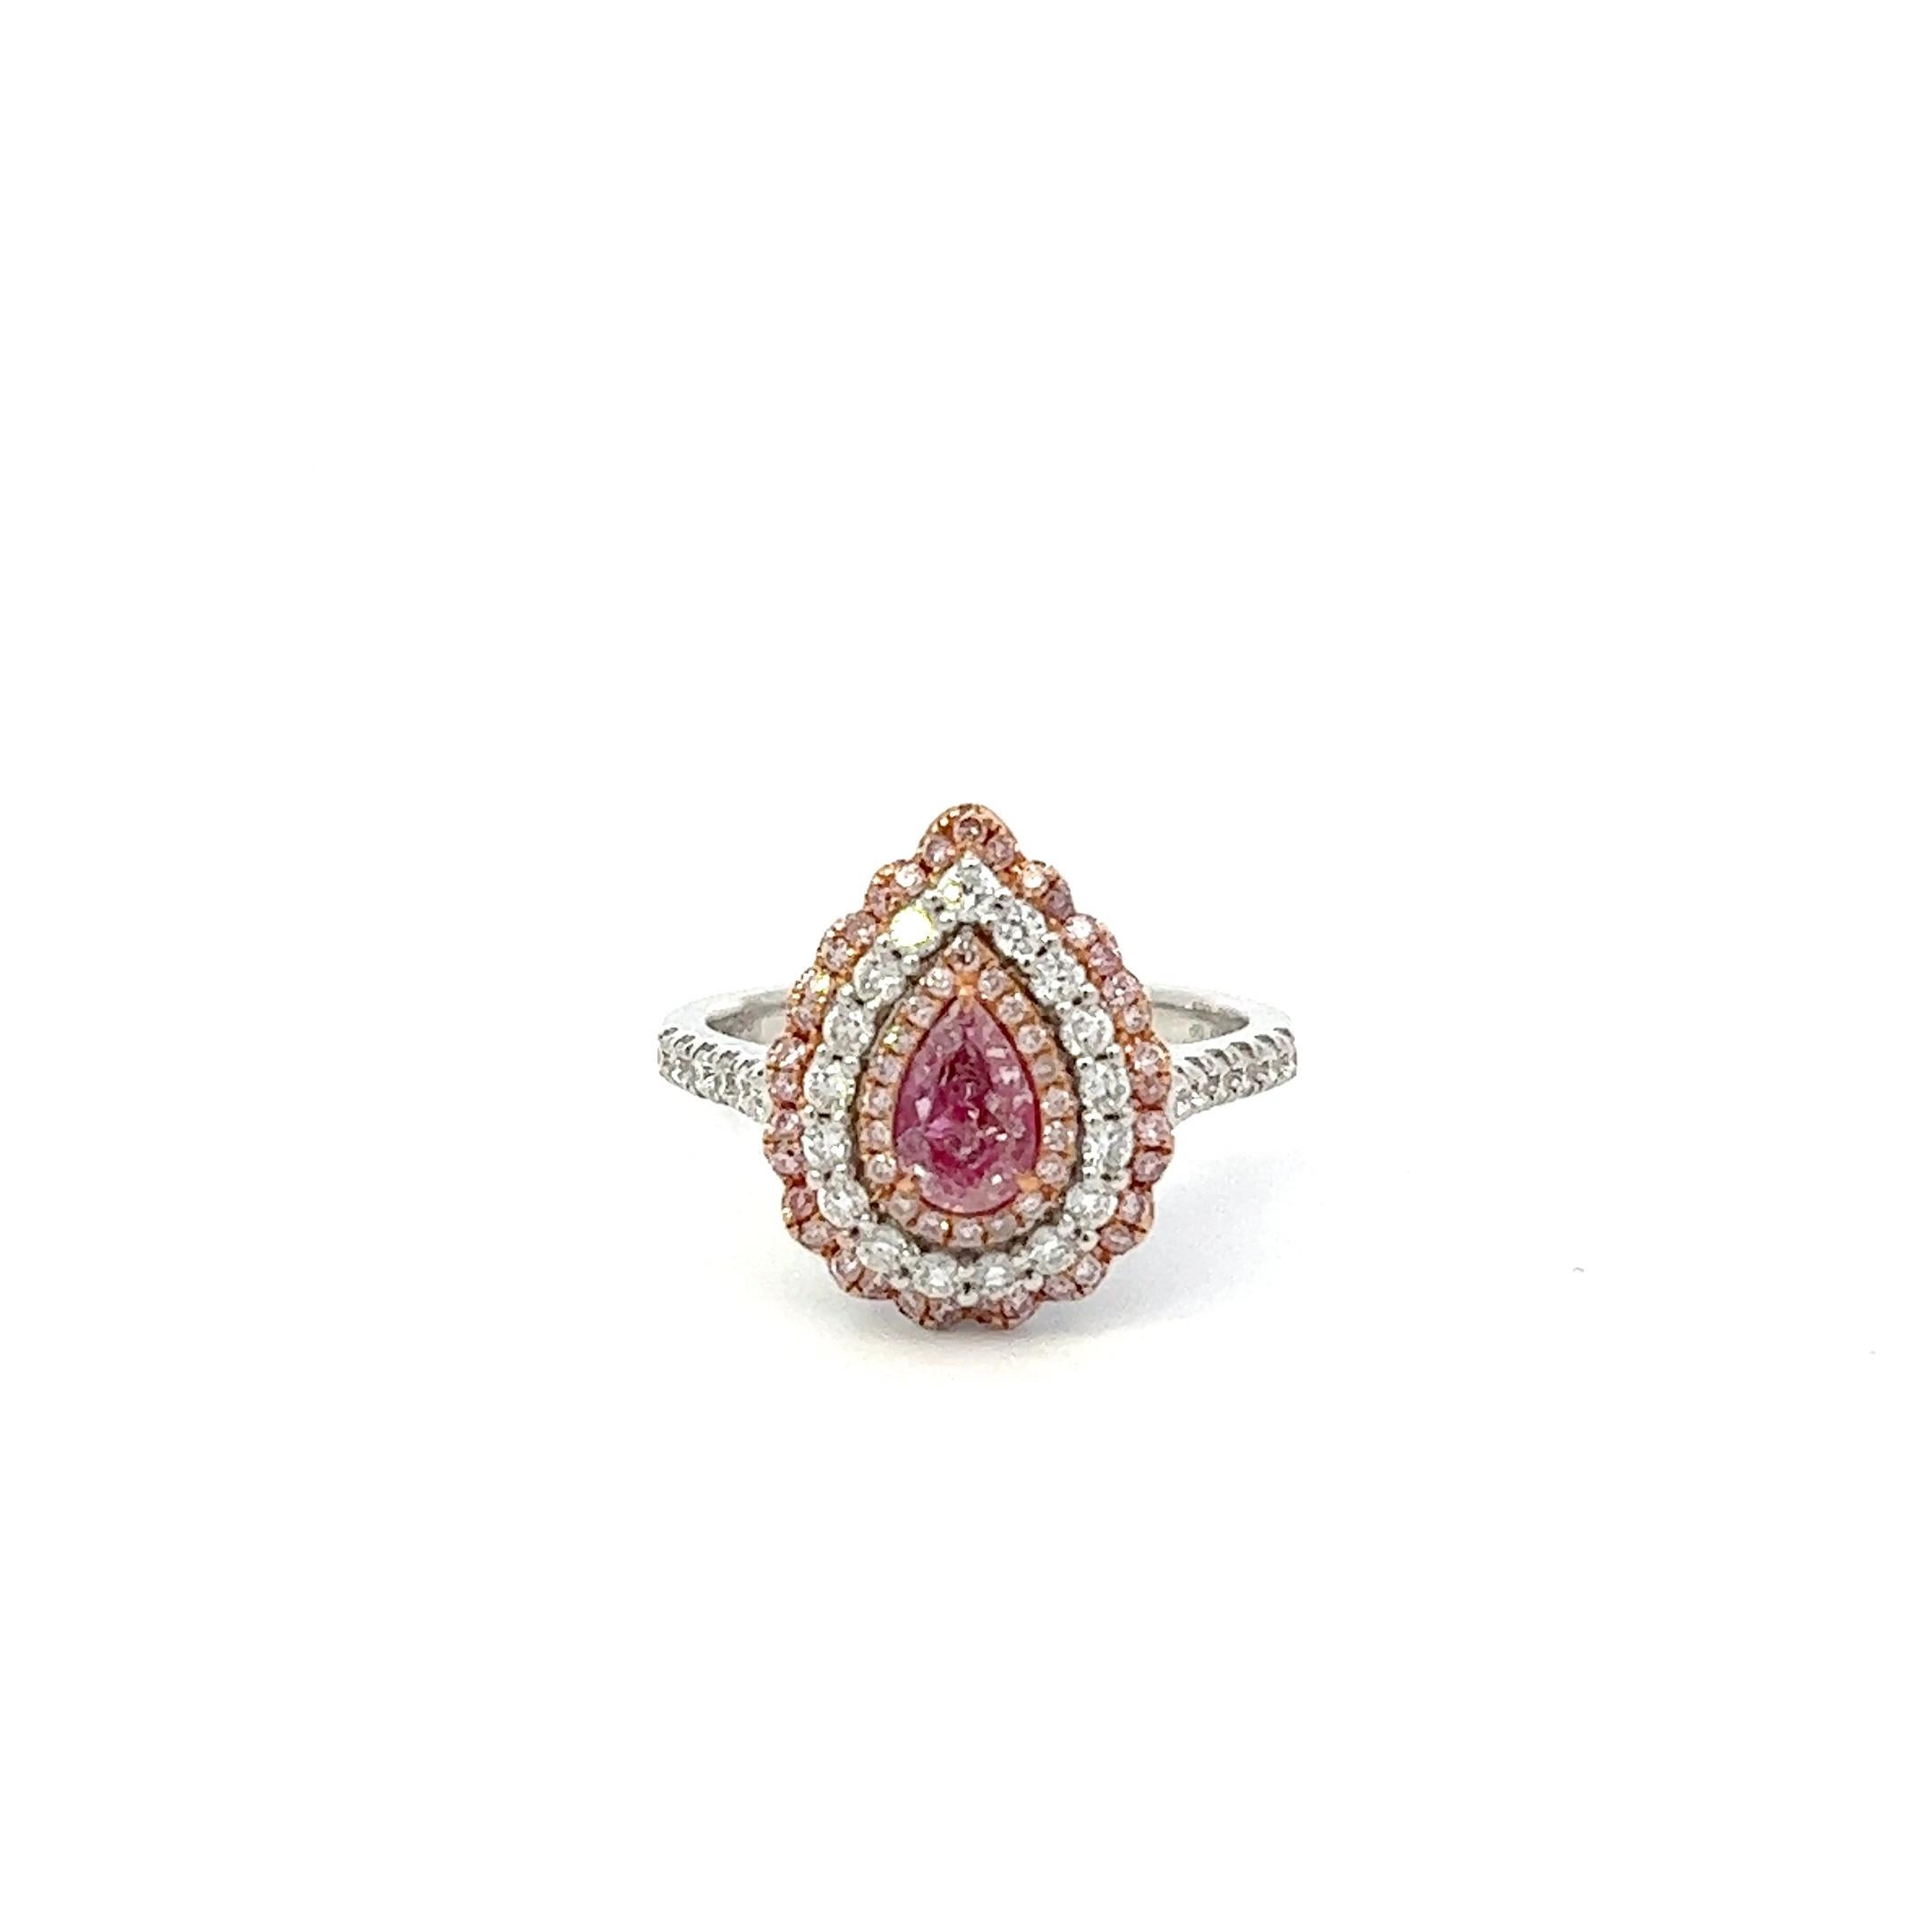 Center: 0.51ct Fancy Brownish Pink Pear I2 GIA# 7391869017
Setting: 18k White Gold 0.69ctw Pink and White Diamonds

An extremely rare and stunning natural pink diamond center. Pink Diamonds account for less than 0.01% of all diamonds mined in the